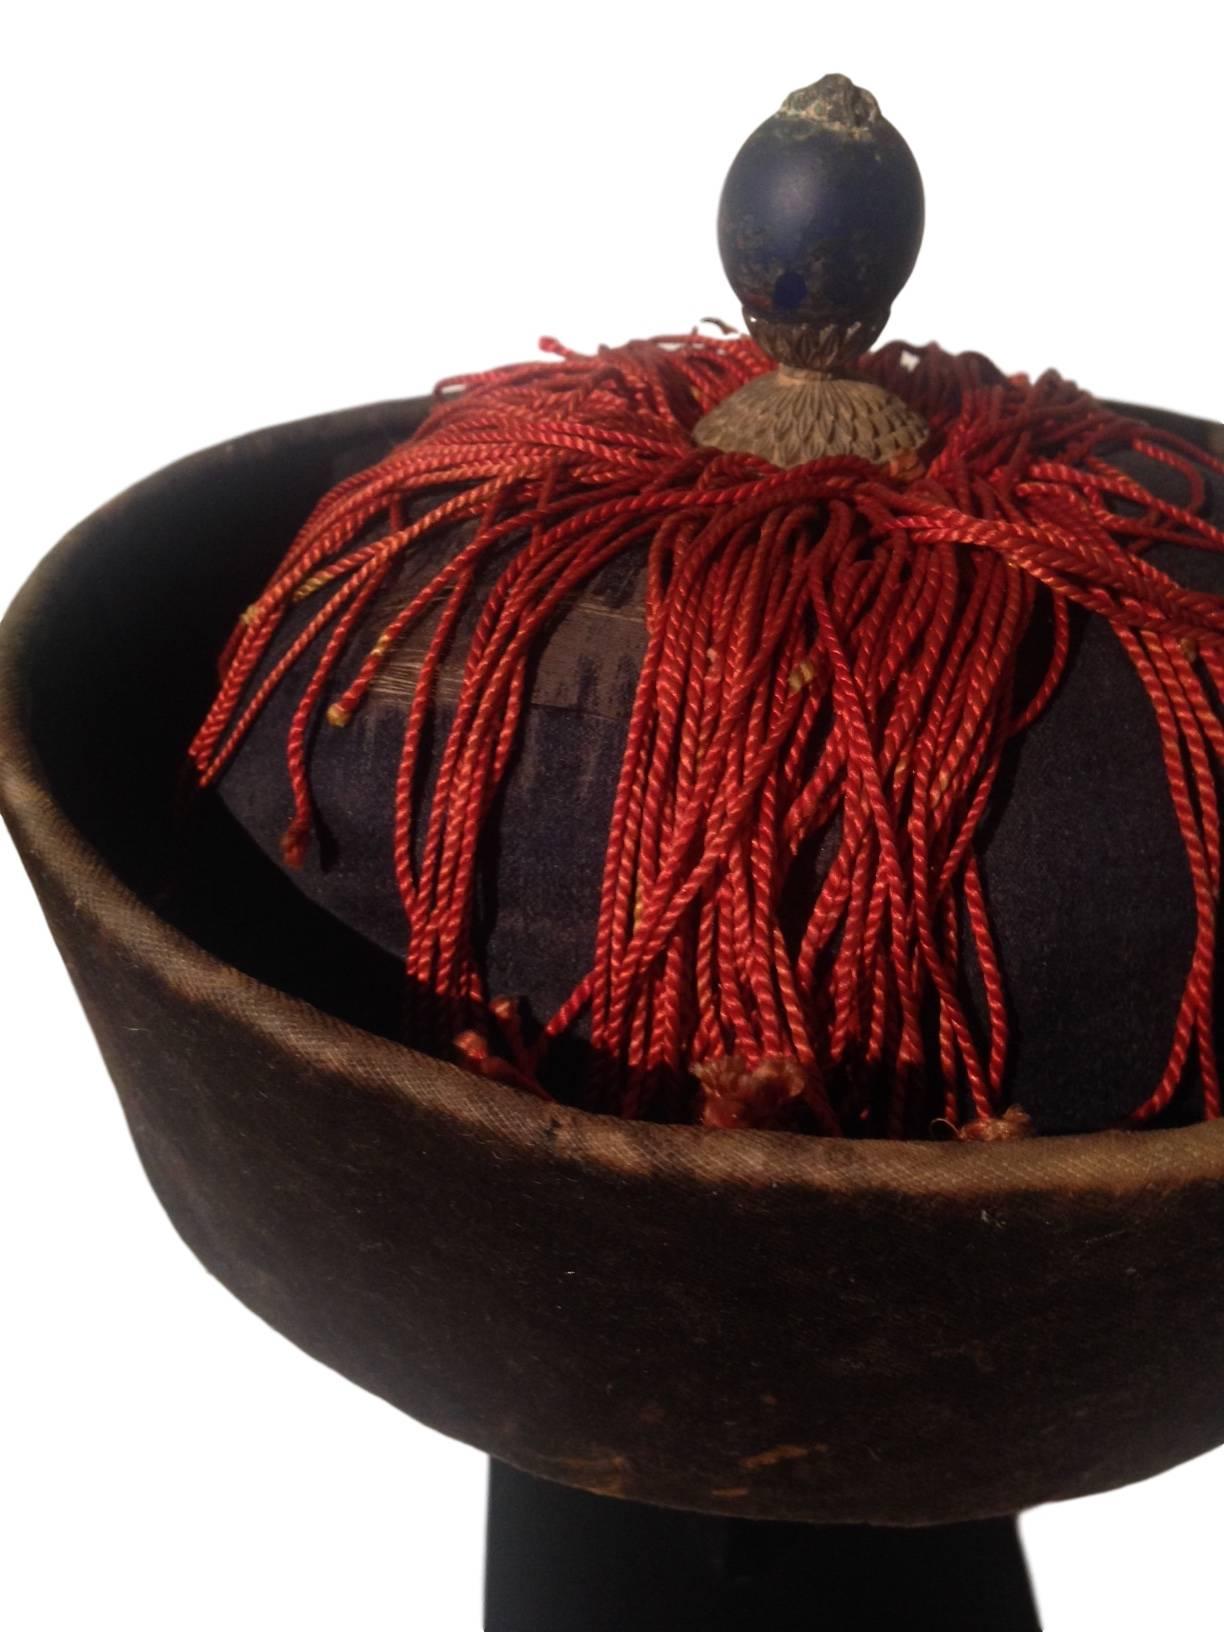 This 19th century Chinese court official's winter hat is made of soft black velvet and is covered with red silk fringe. The dark blue knob on the top indicates that this particular hat was a Qing official's hat and the knob is an imperial court cap